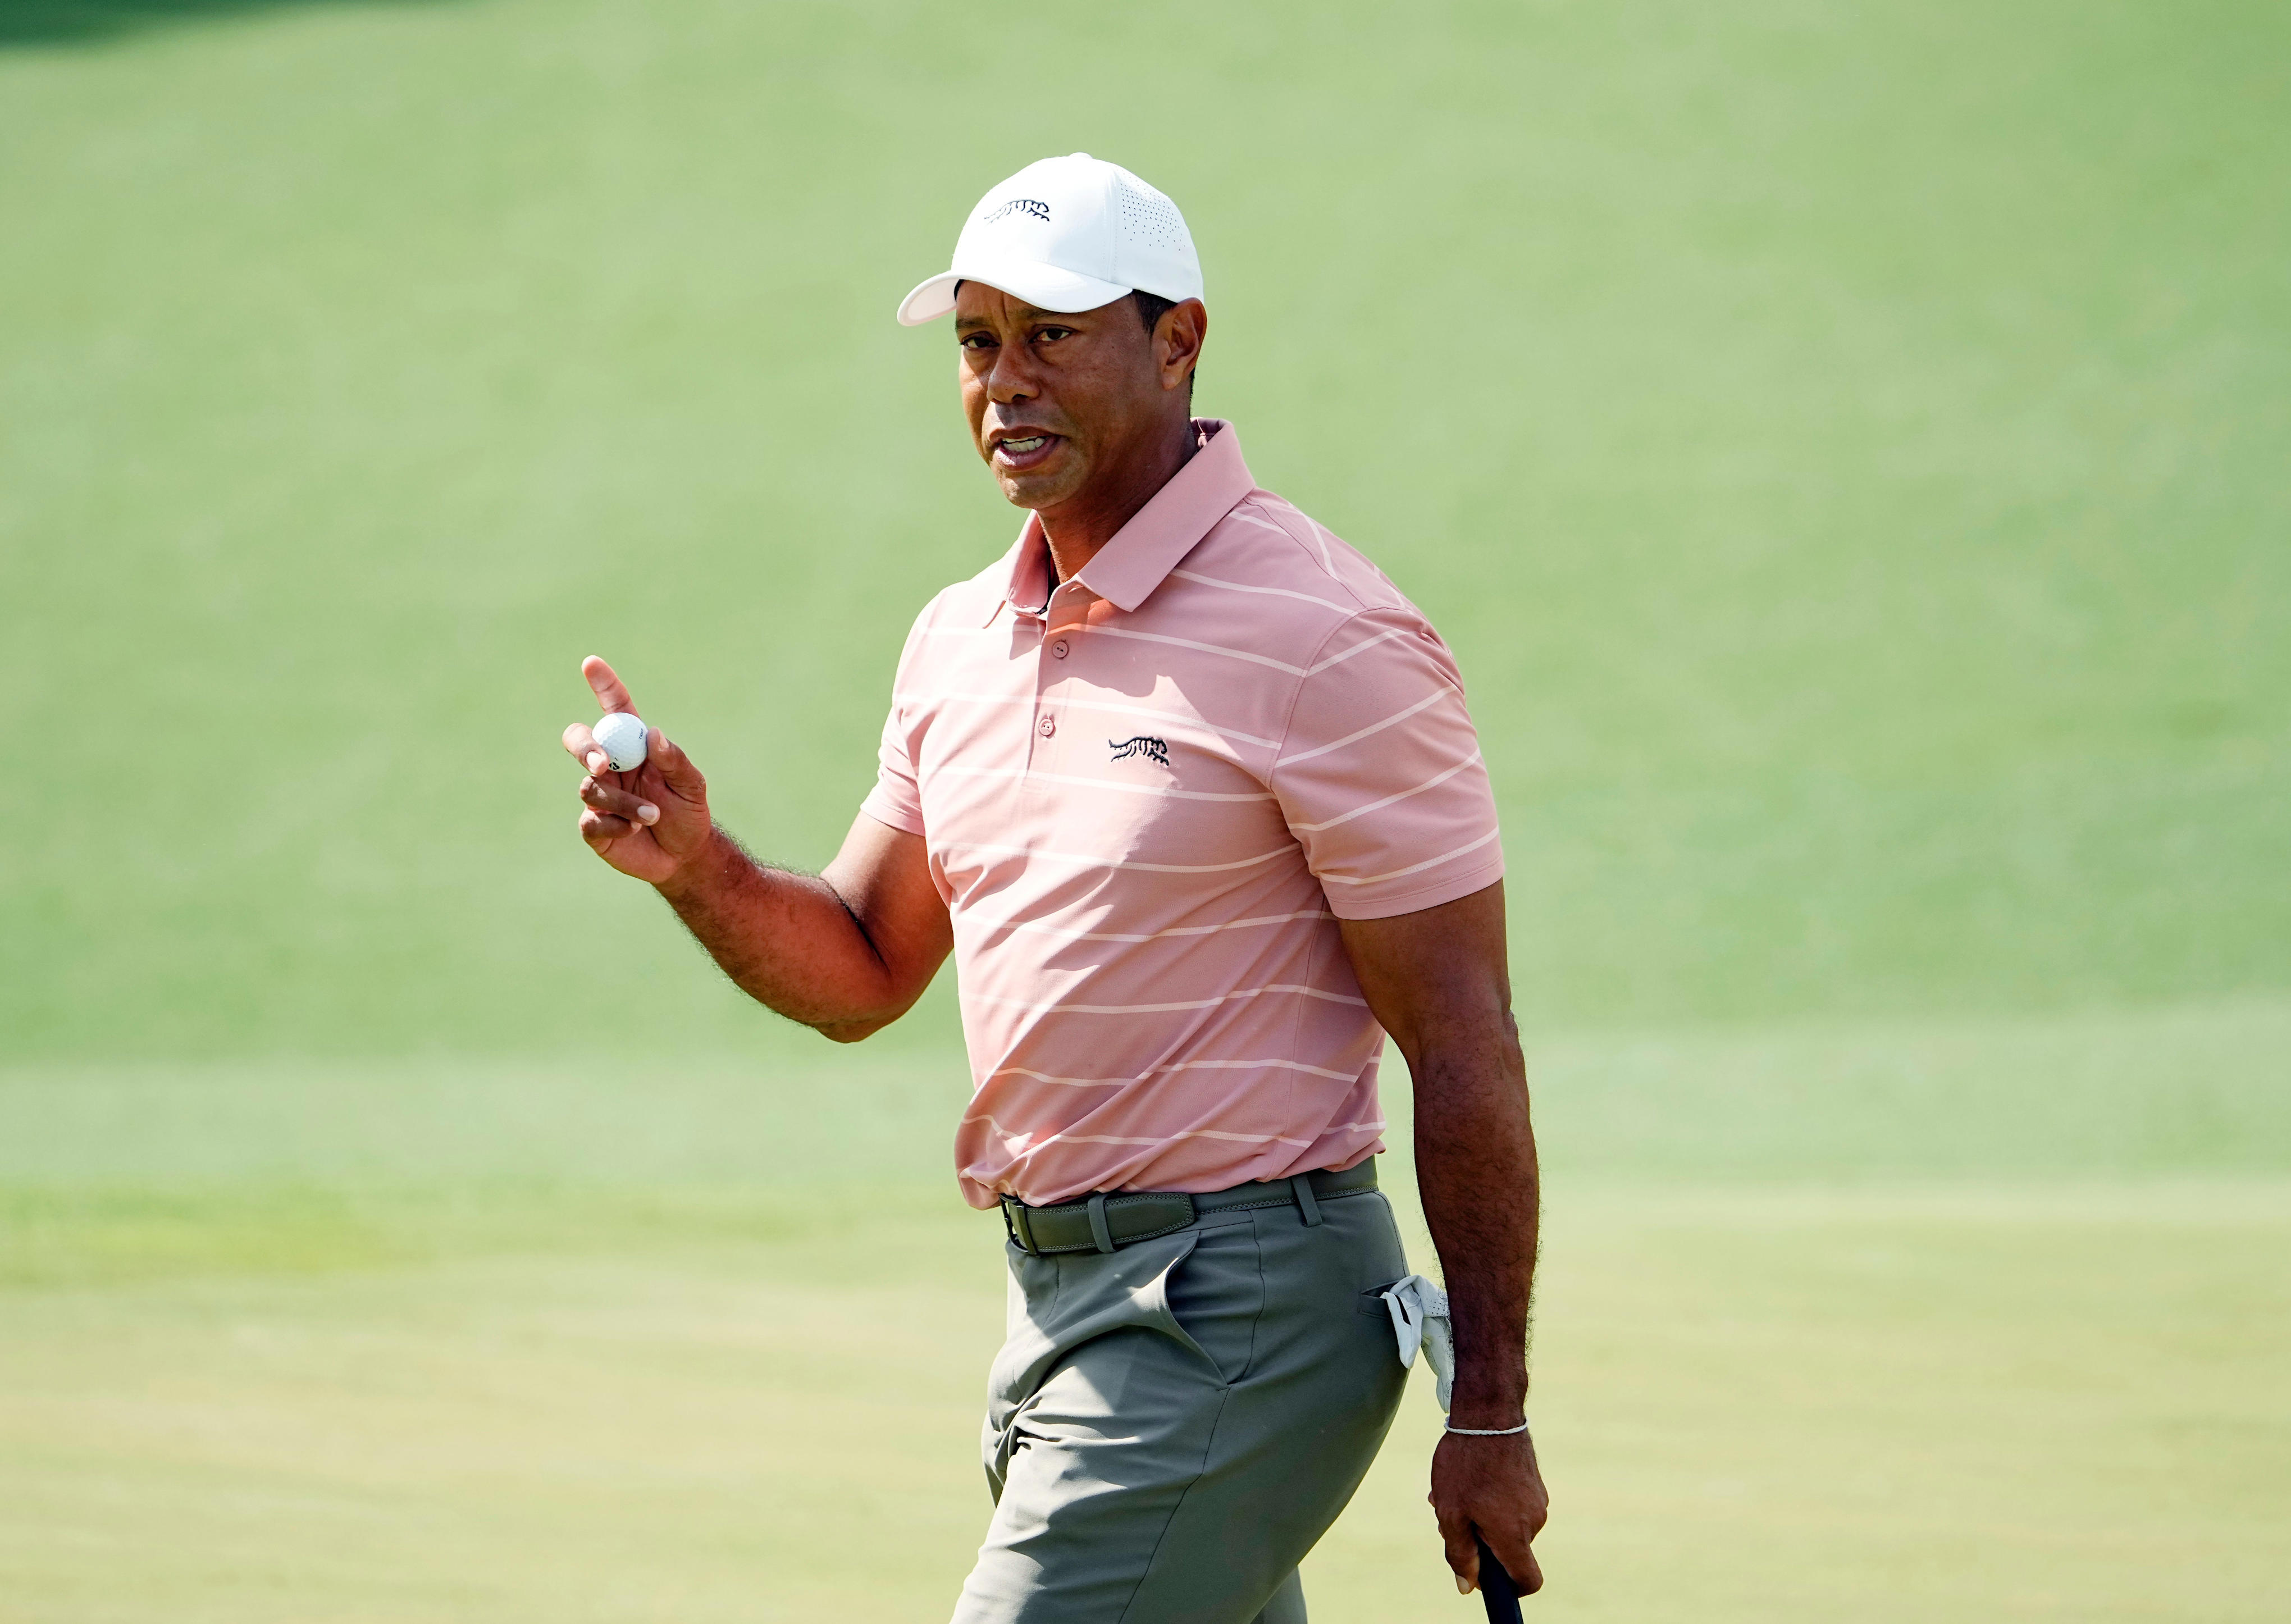 who made cut at masters? did tiger woods make masters cut? where cut line landed and who made it